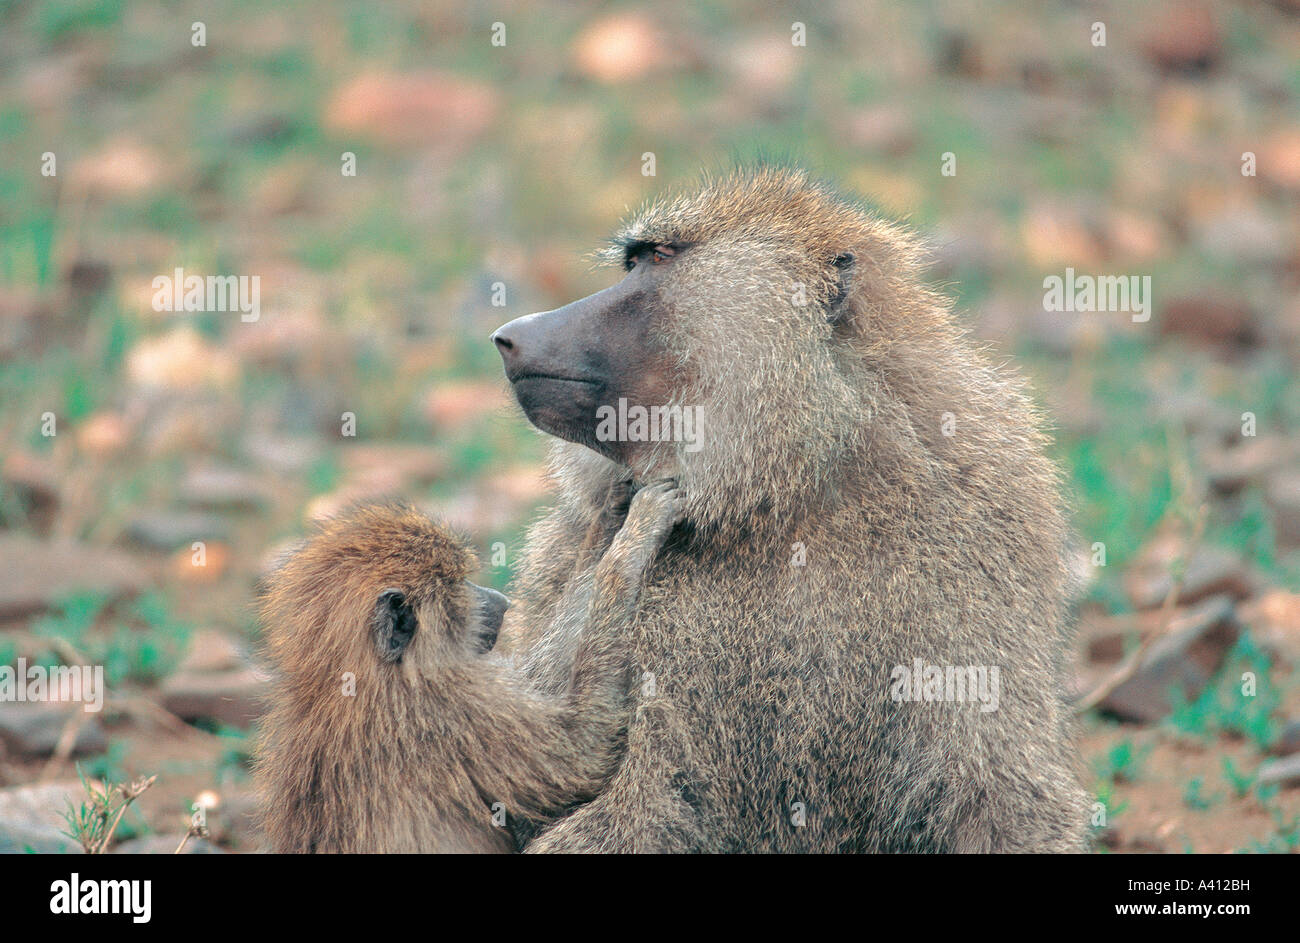 Juvenile Olive Baboon grooms adult male at Serengeti National Park Tanzania East Africa Stock Photo